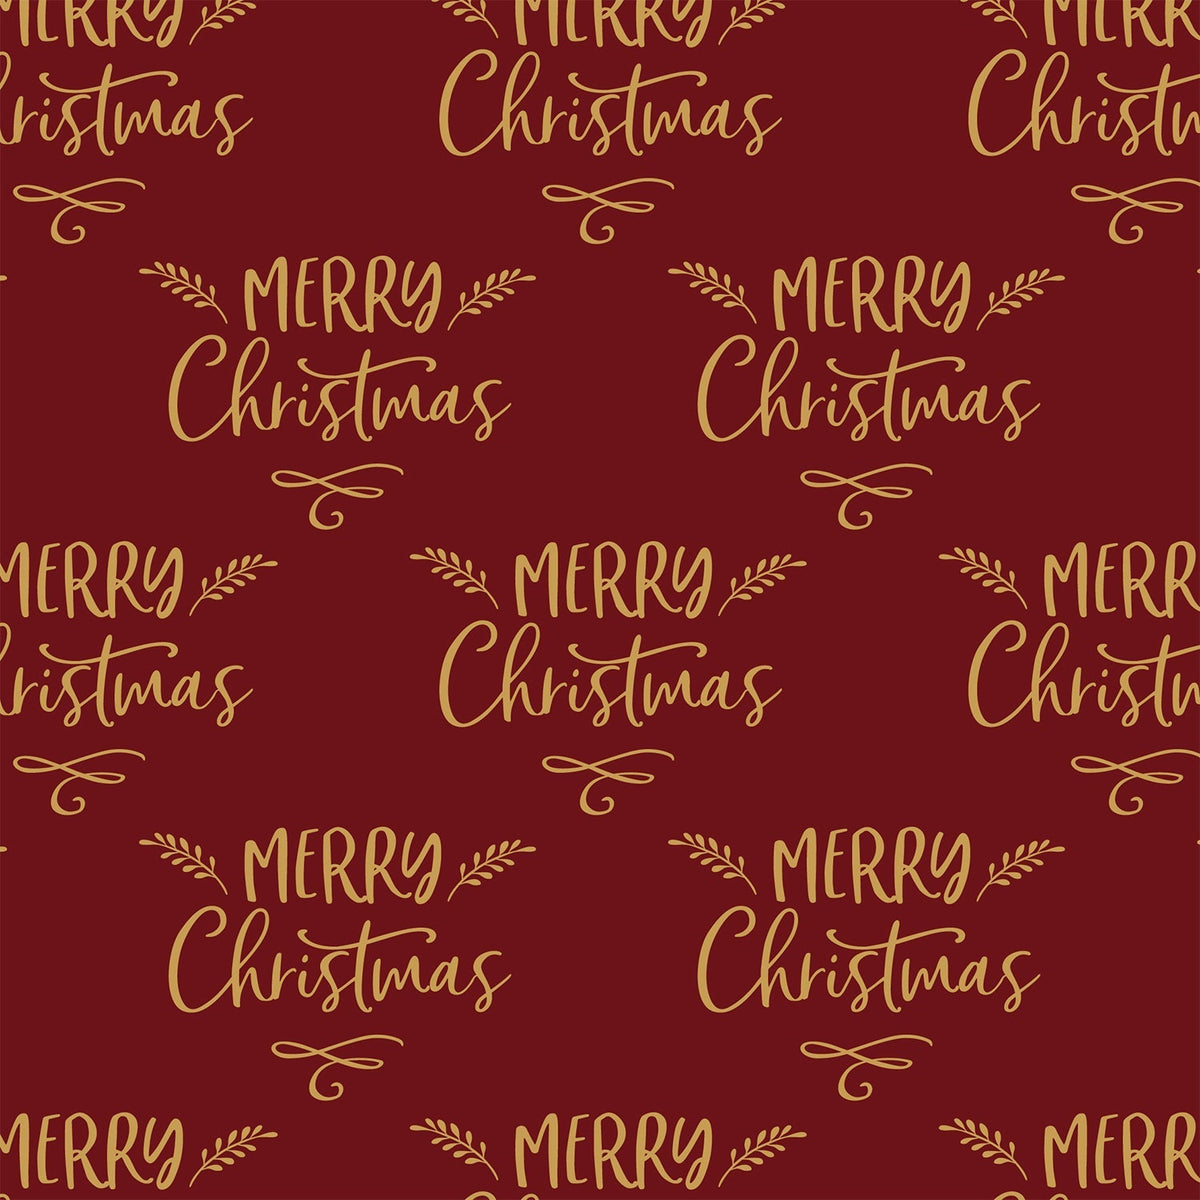 Personalizable Flat Wrapping Paper for Halloween, Holiday, Party